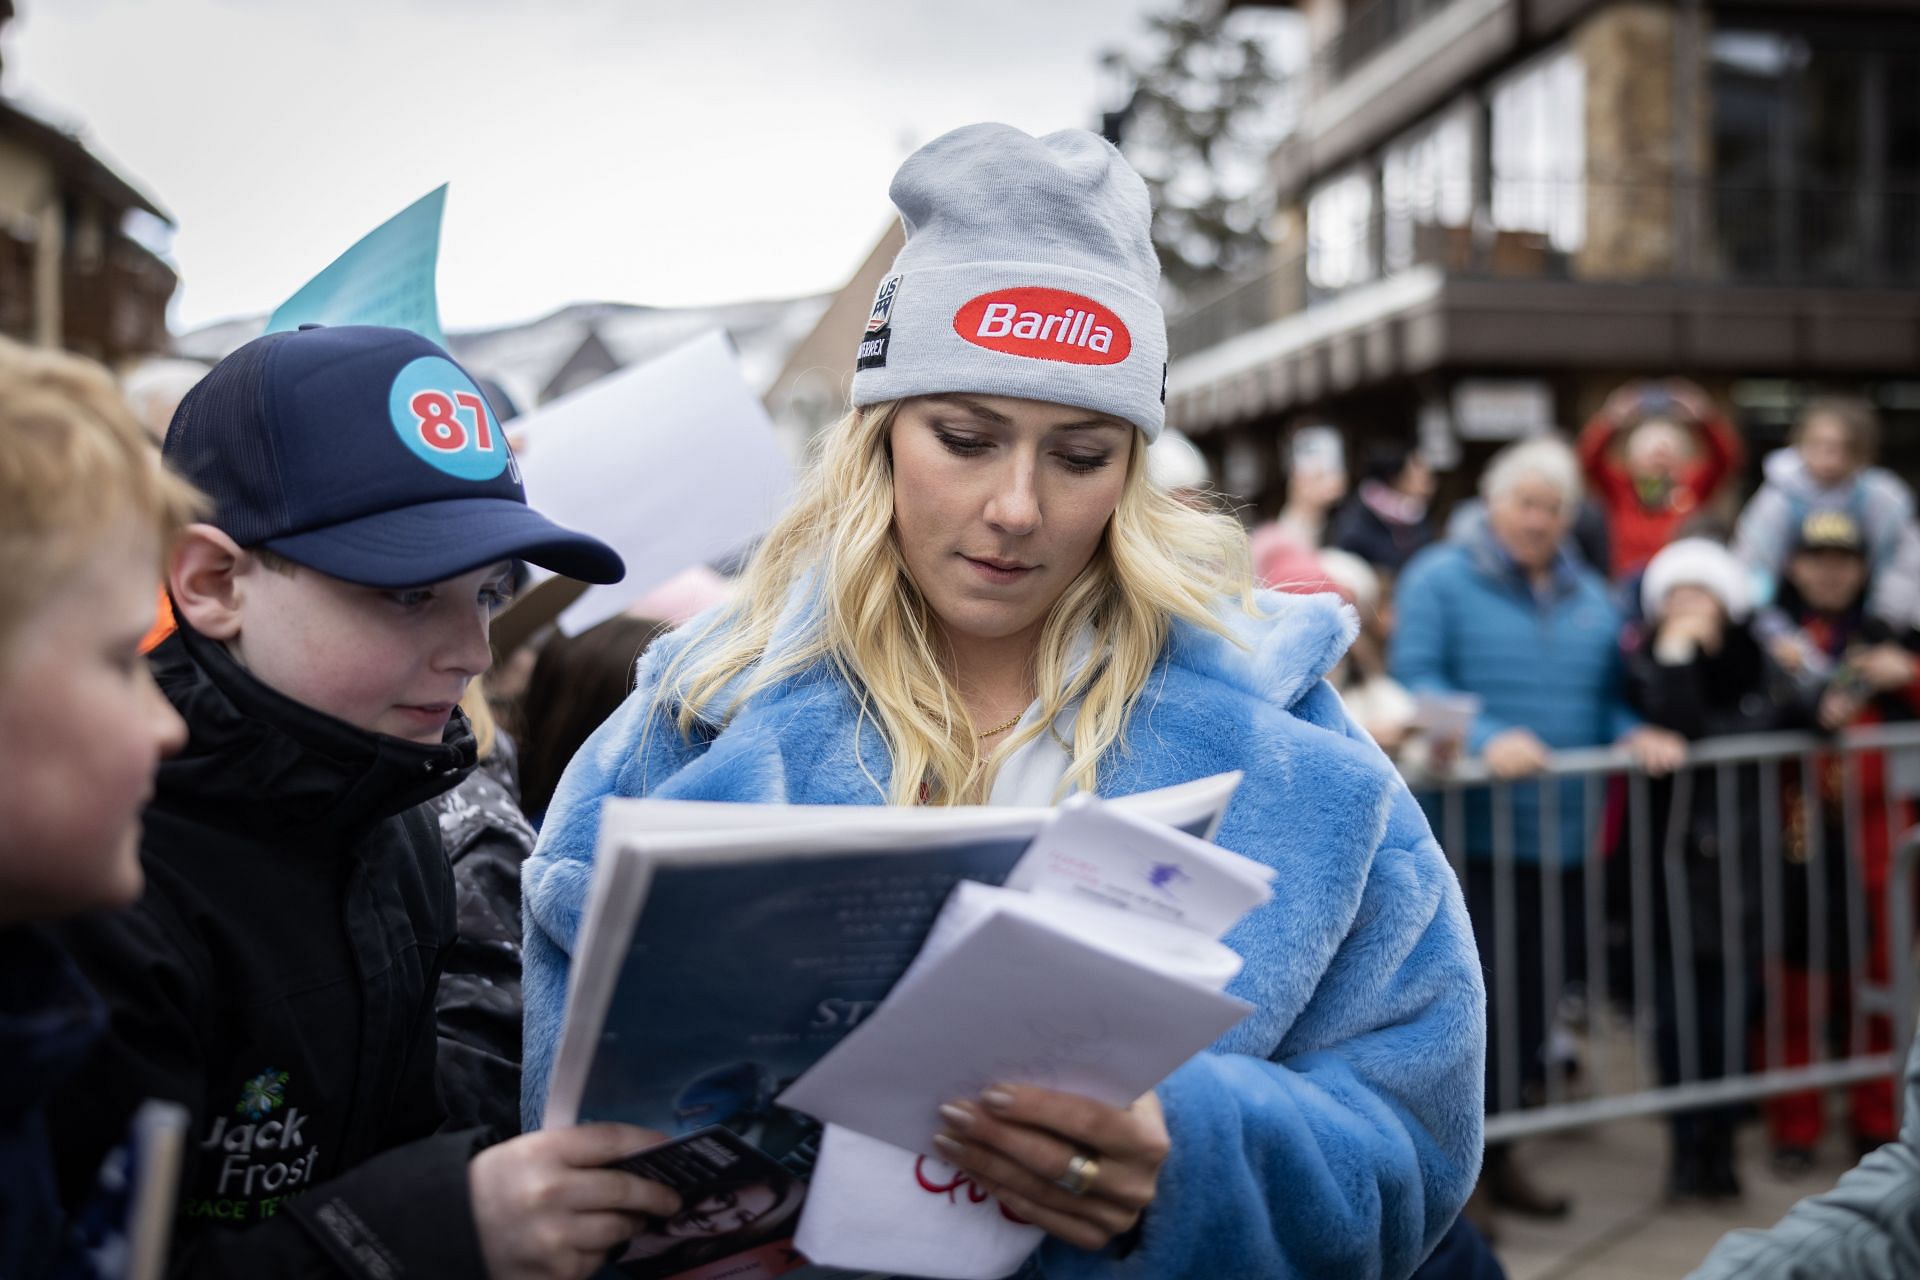 Mikaela Shiffrin signs autographs during a celebration of her record-breaking 87th and 88th Alpine Ski World Cup victories at Solaris Plaza on April 2, 2023 in Vail, Colorado. Shiffrin is now the most decorated ski racer of all time. (Photo by Chet Strange/Getty Images)